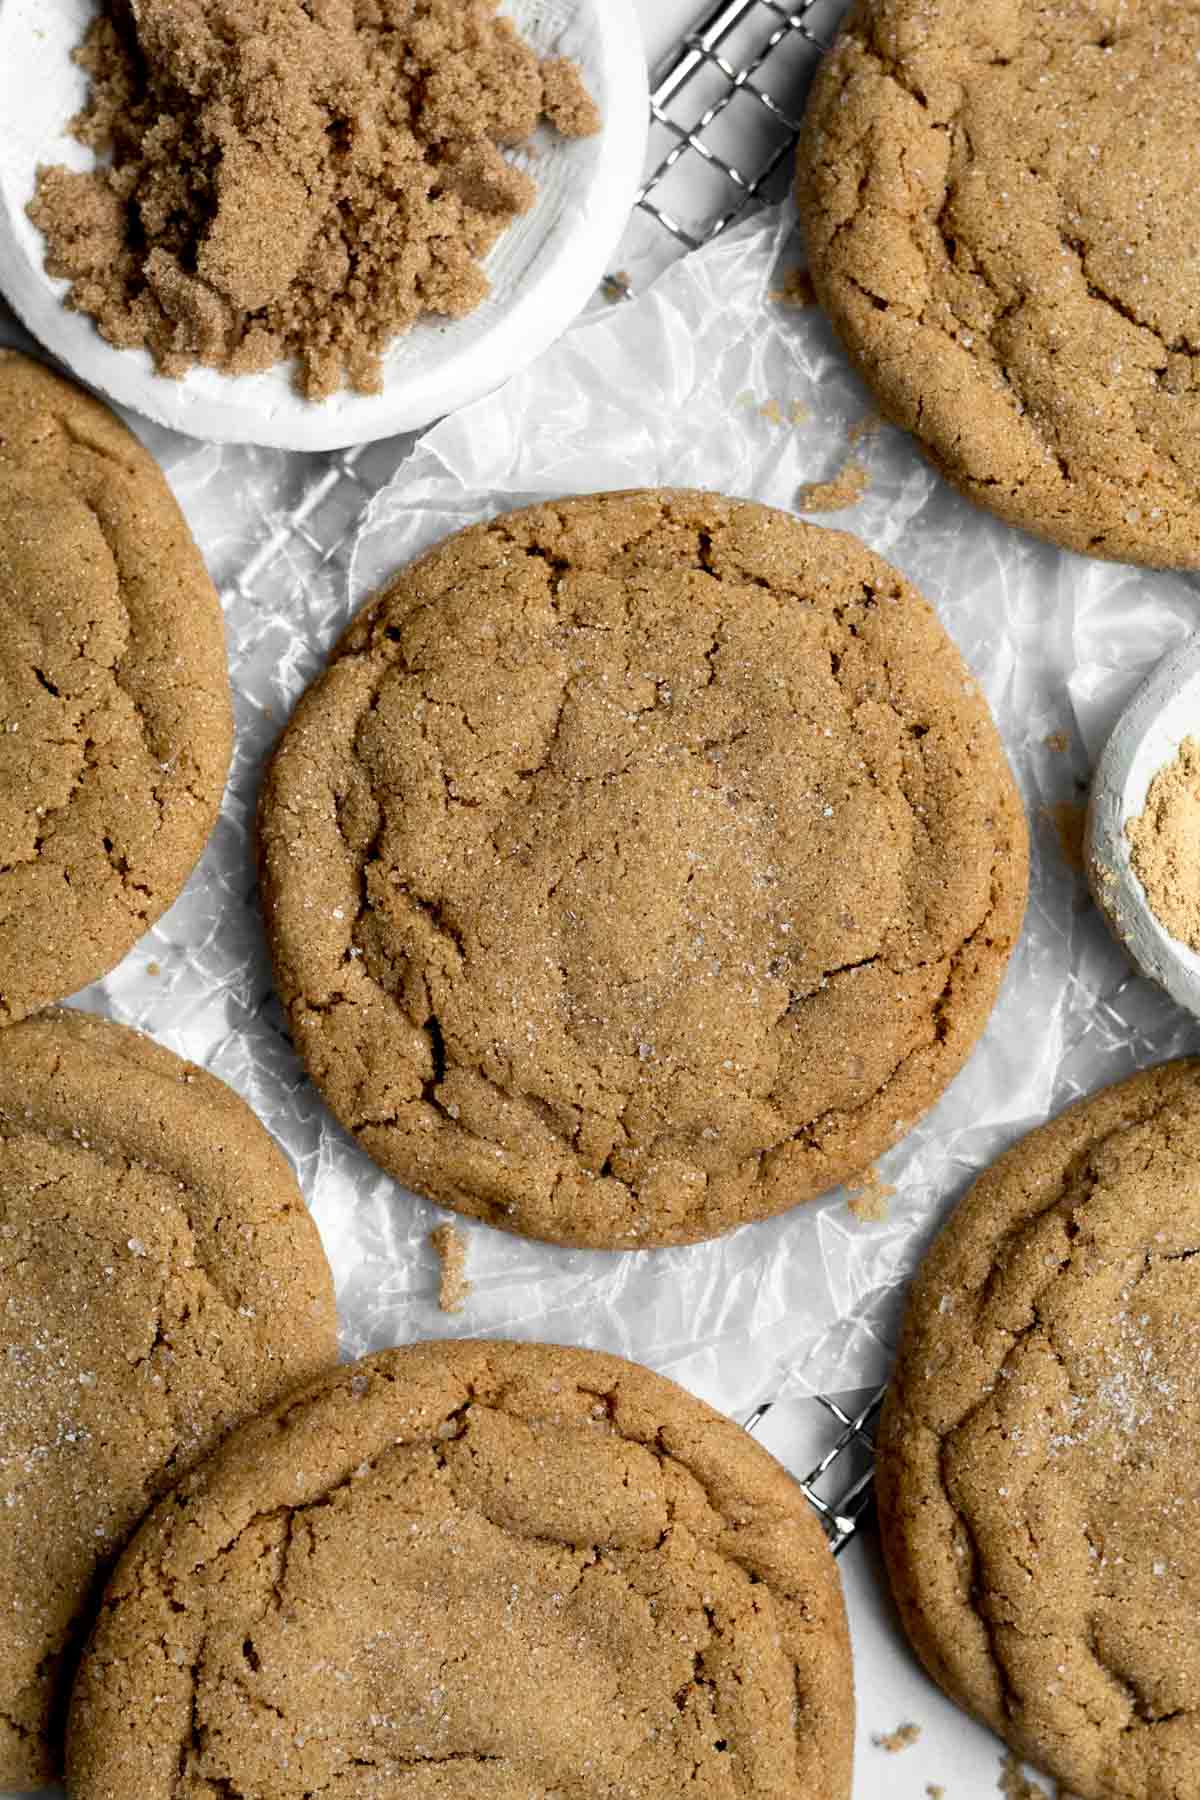 The crisp baked crinkles spread on the top edges of the Gluten Free Ginger Cookies.